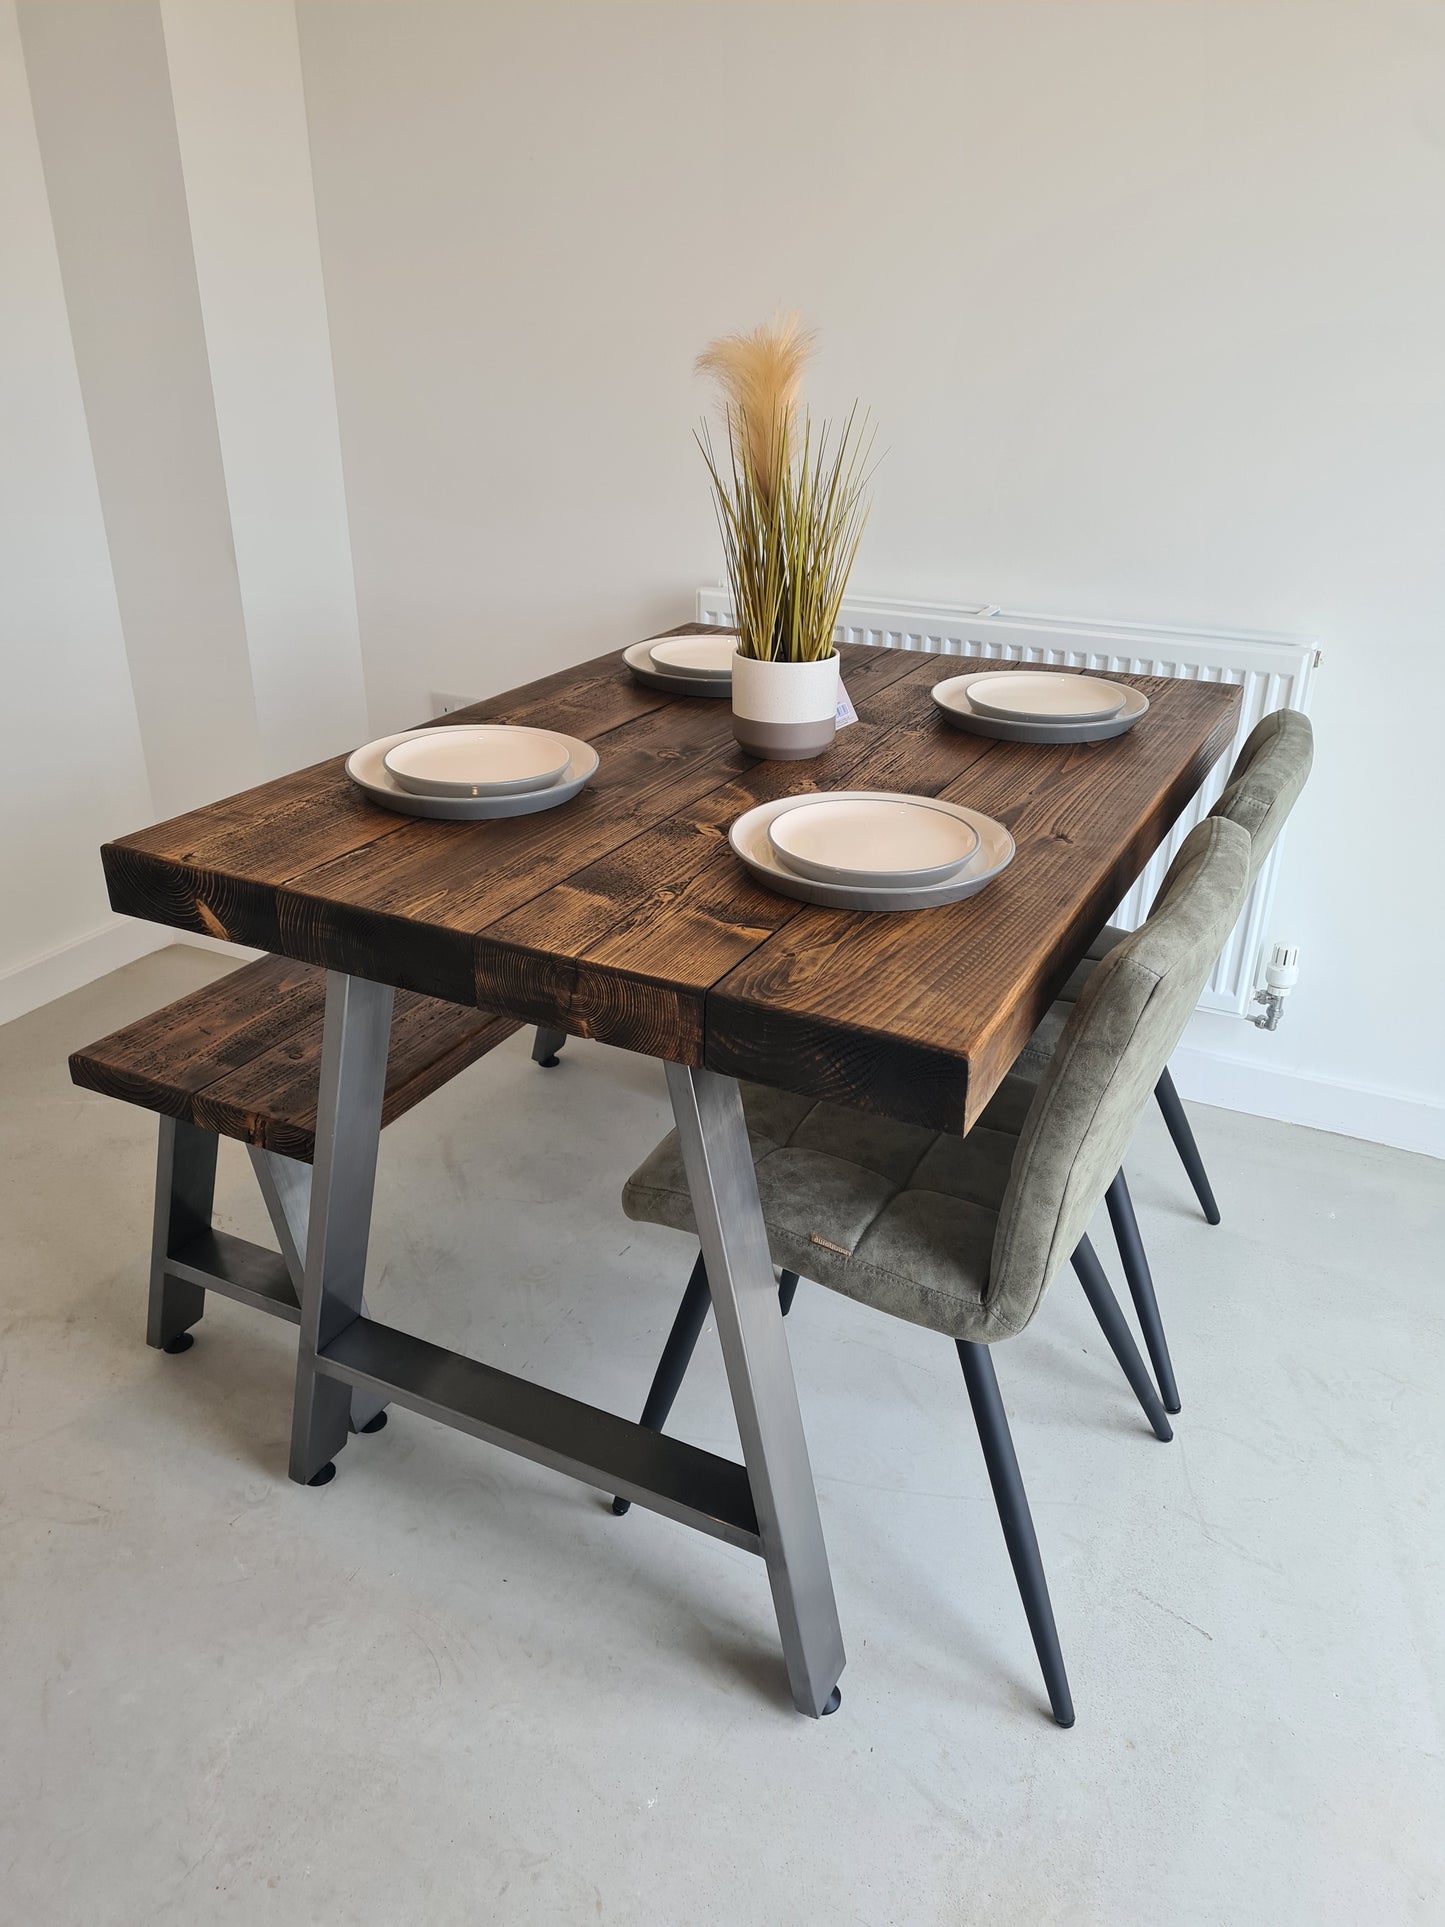 Dining Table with A Frame legs